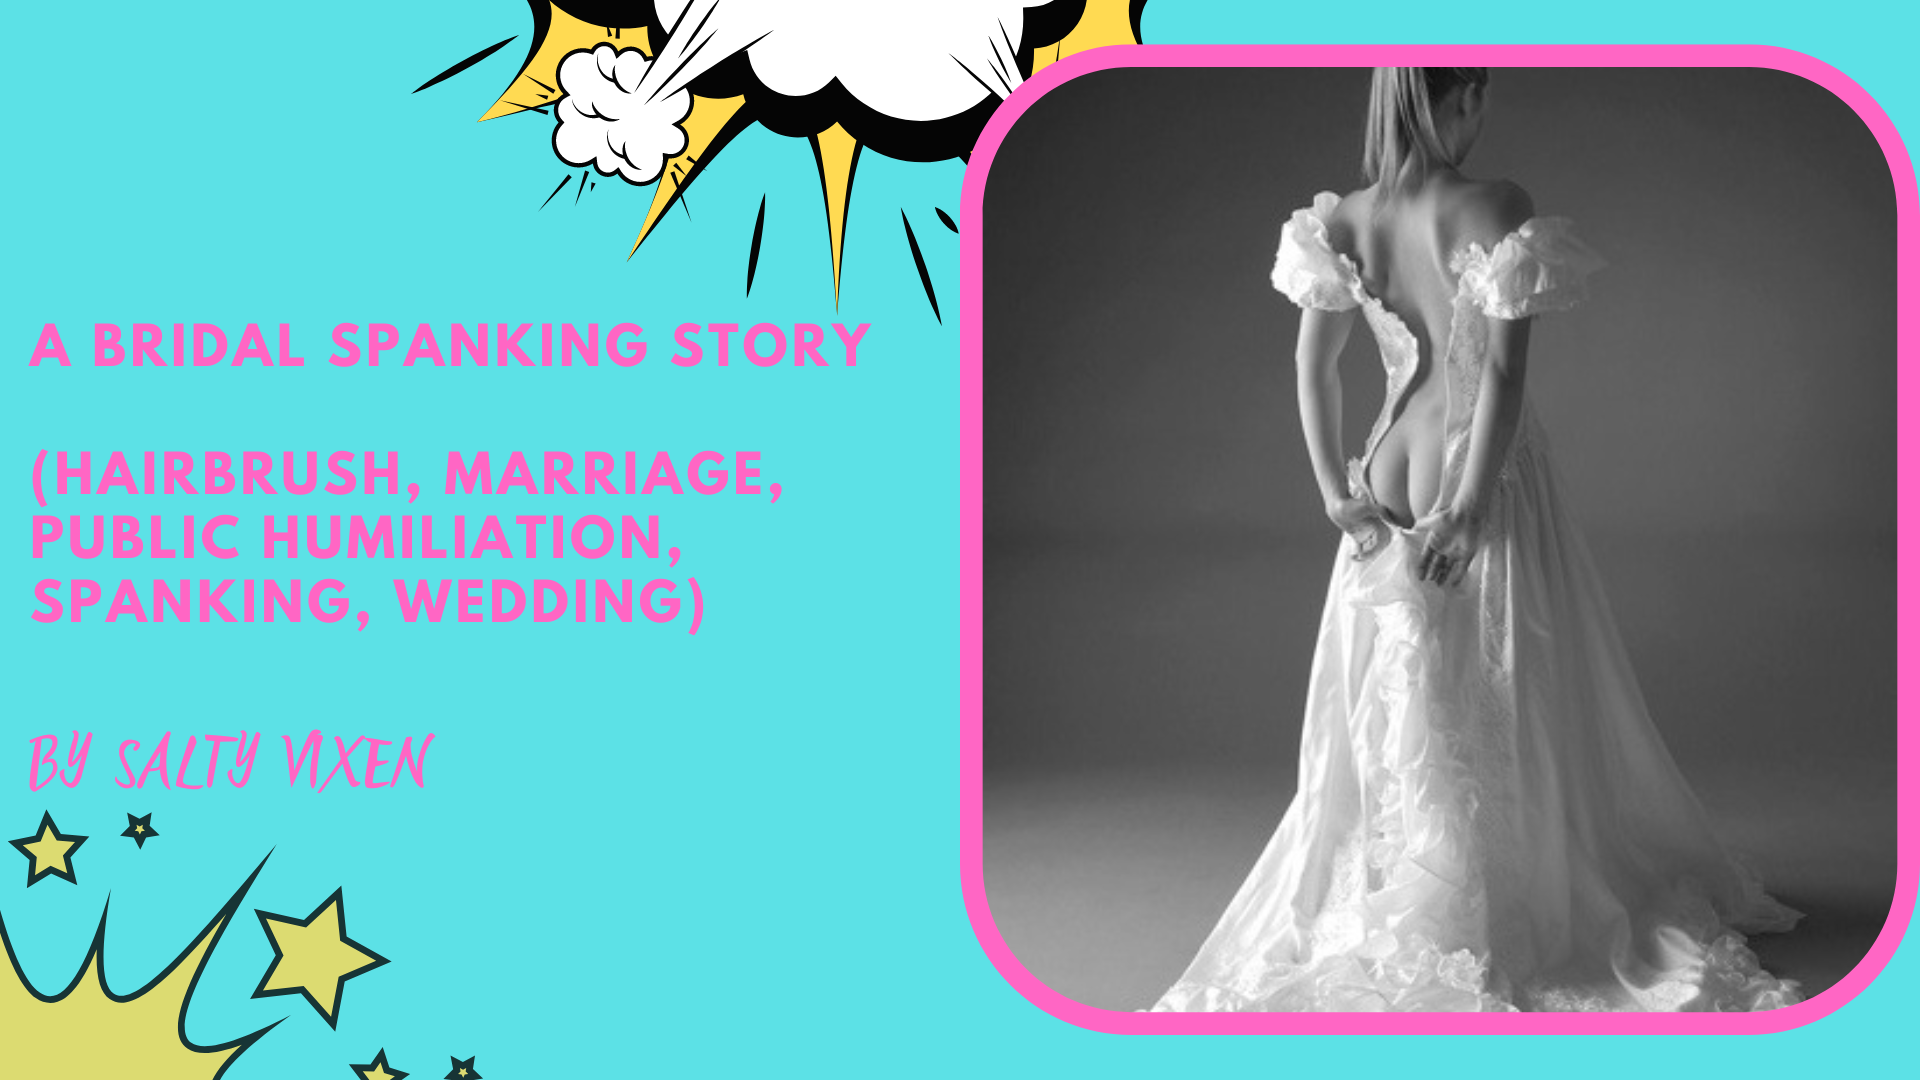 A Bridal Spanking Story (hairbrush, public humiliation, spanking) ~ Salty Vixen Stories and More image pic